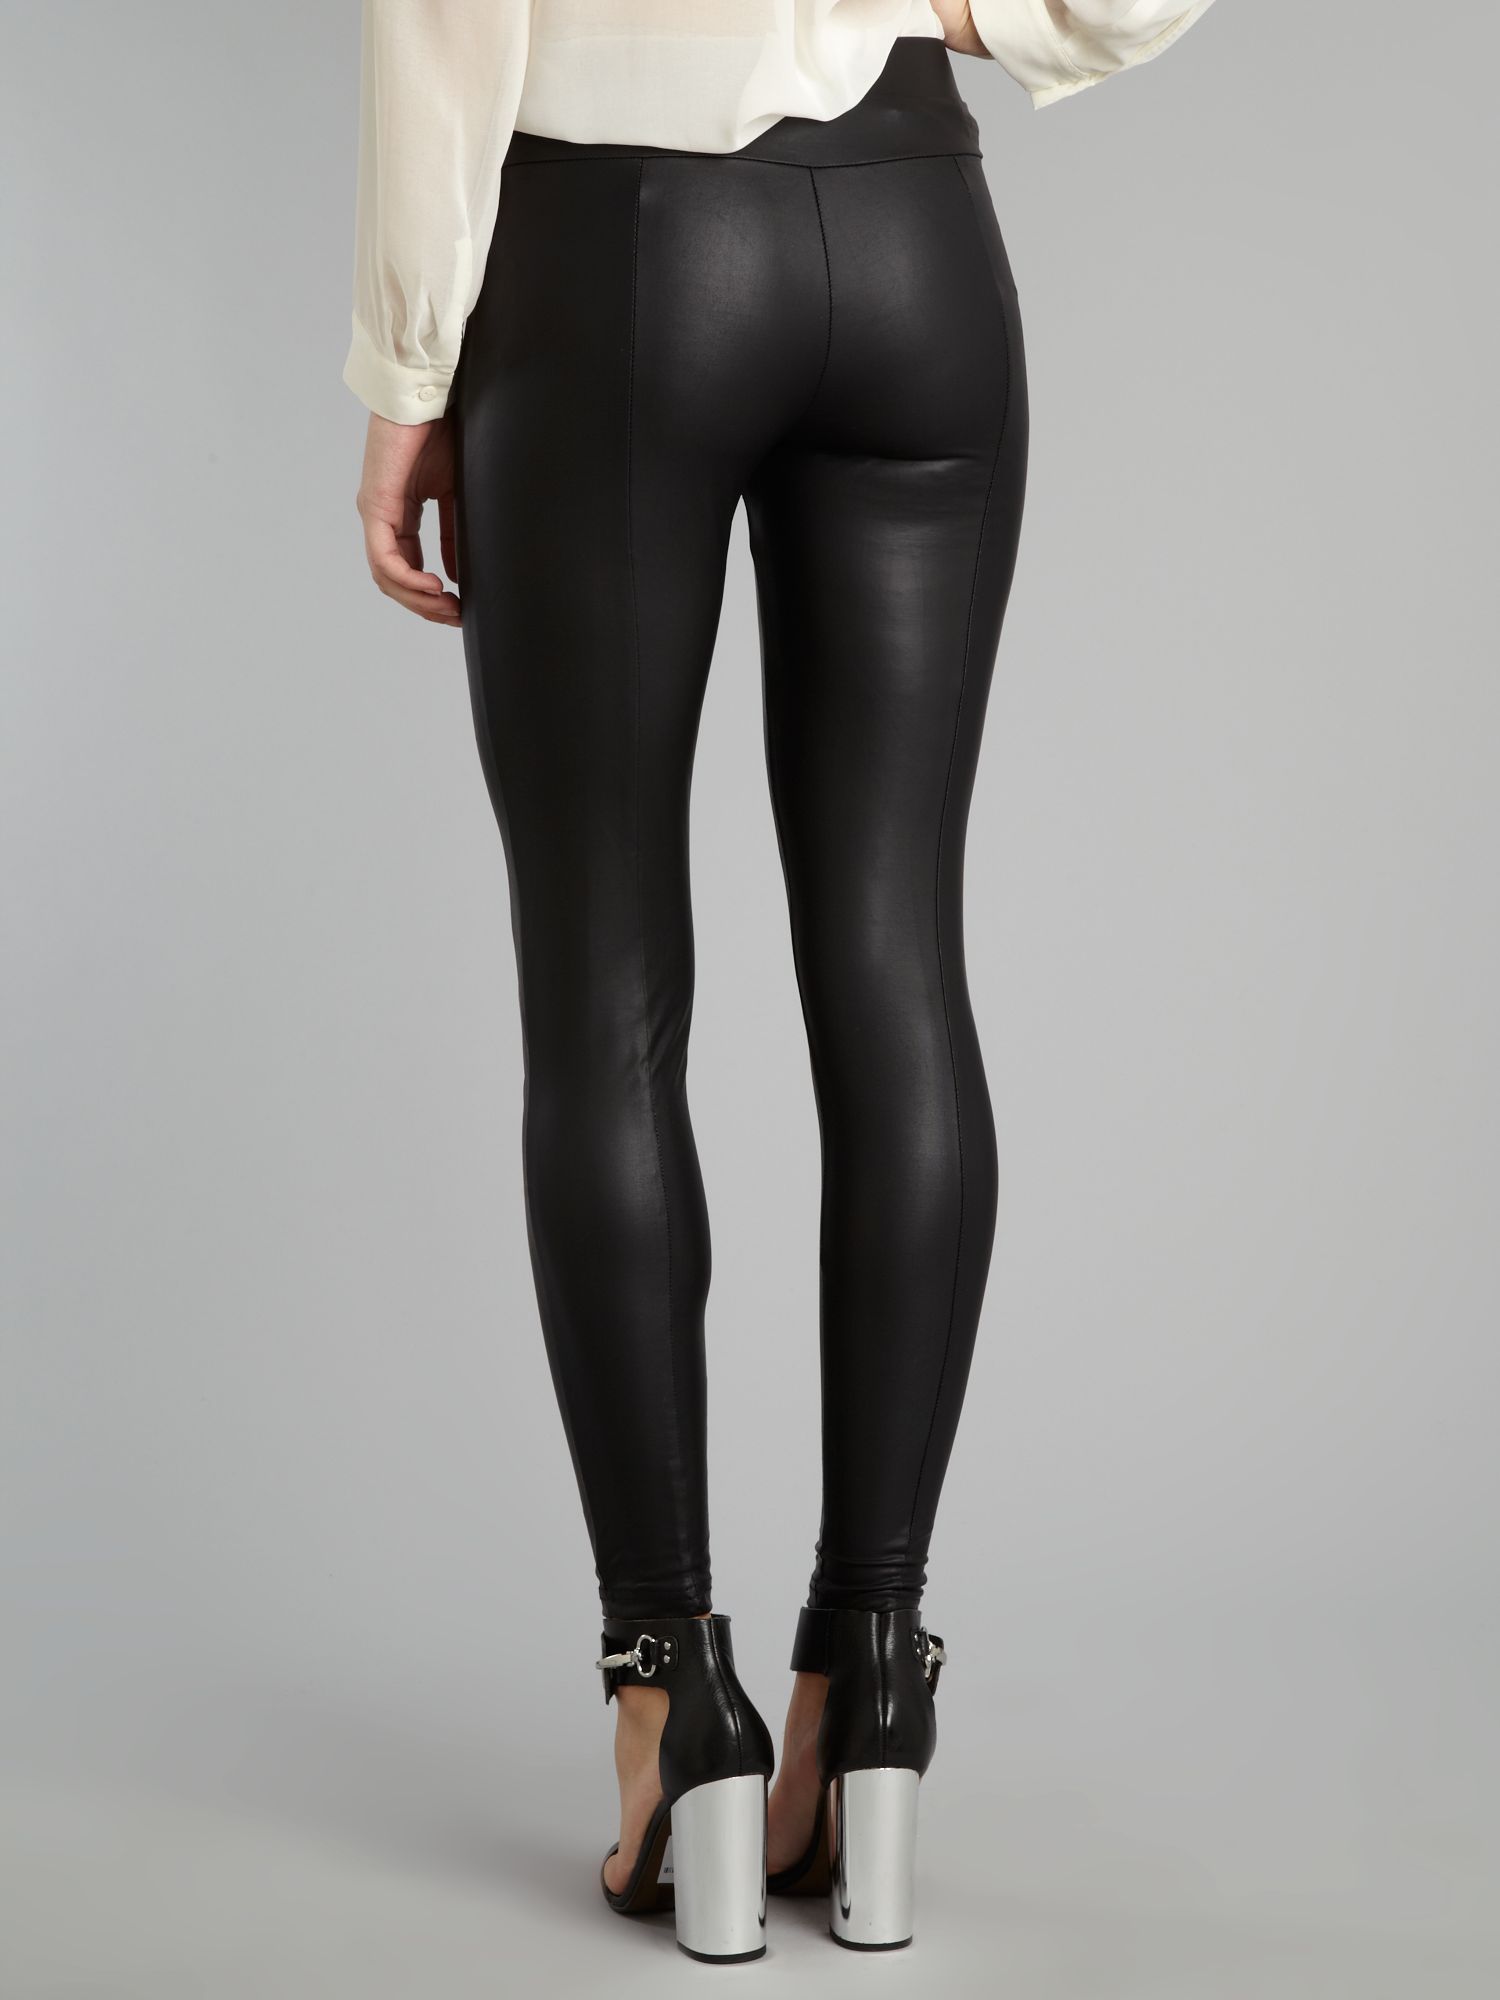 Glossy Wet Look Leggings  International Society of Precision Agriculture